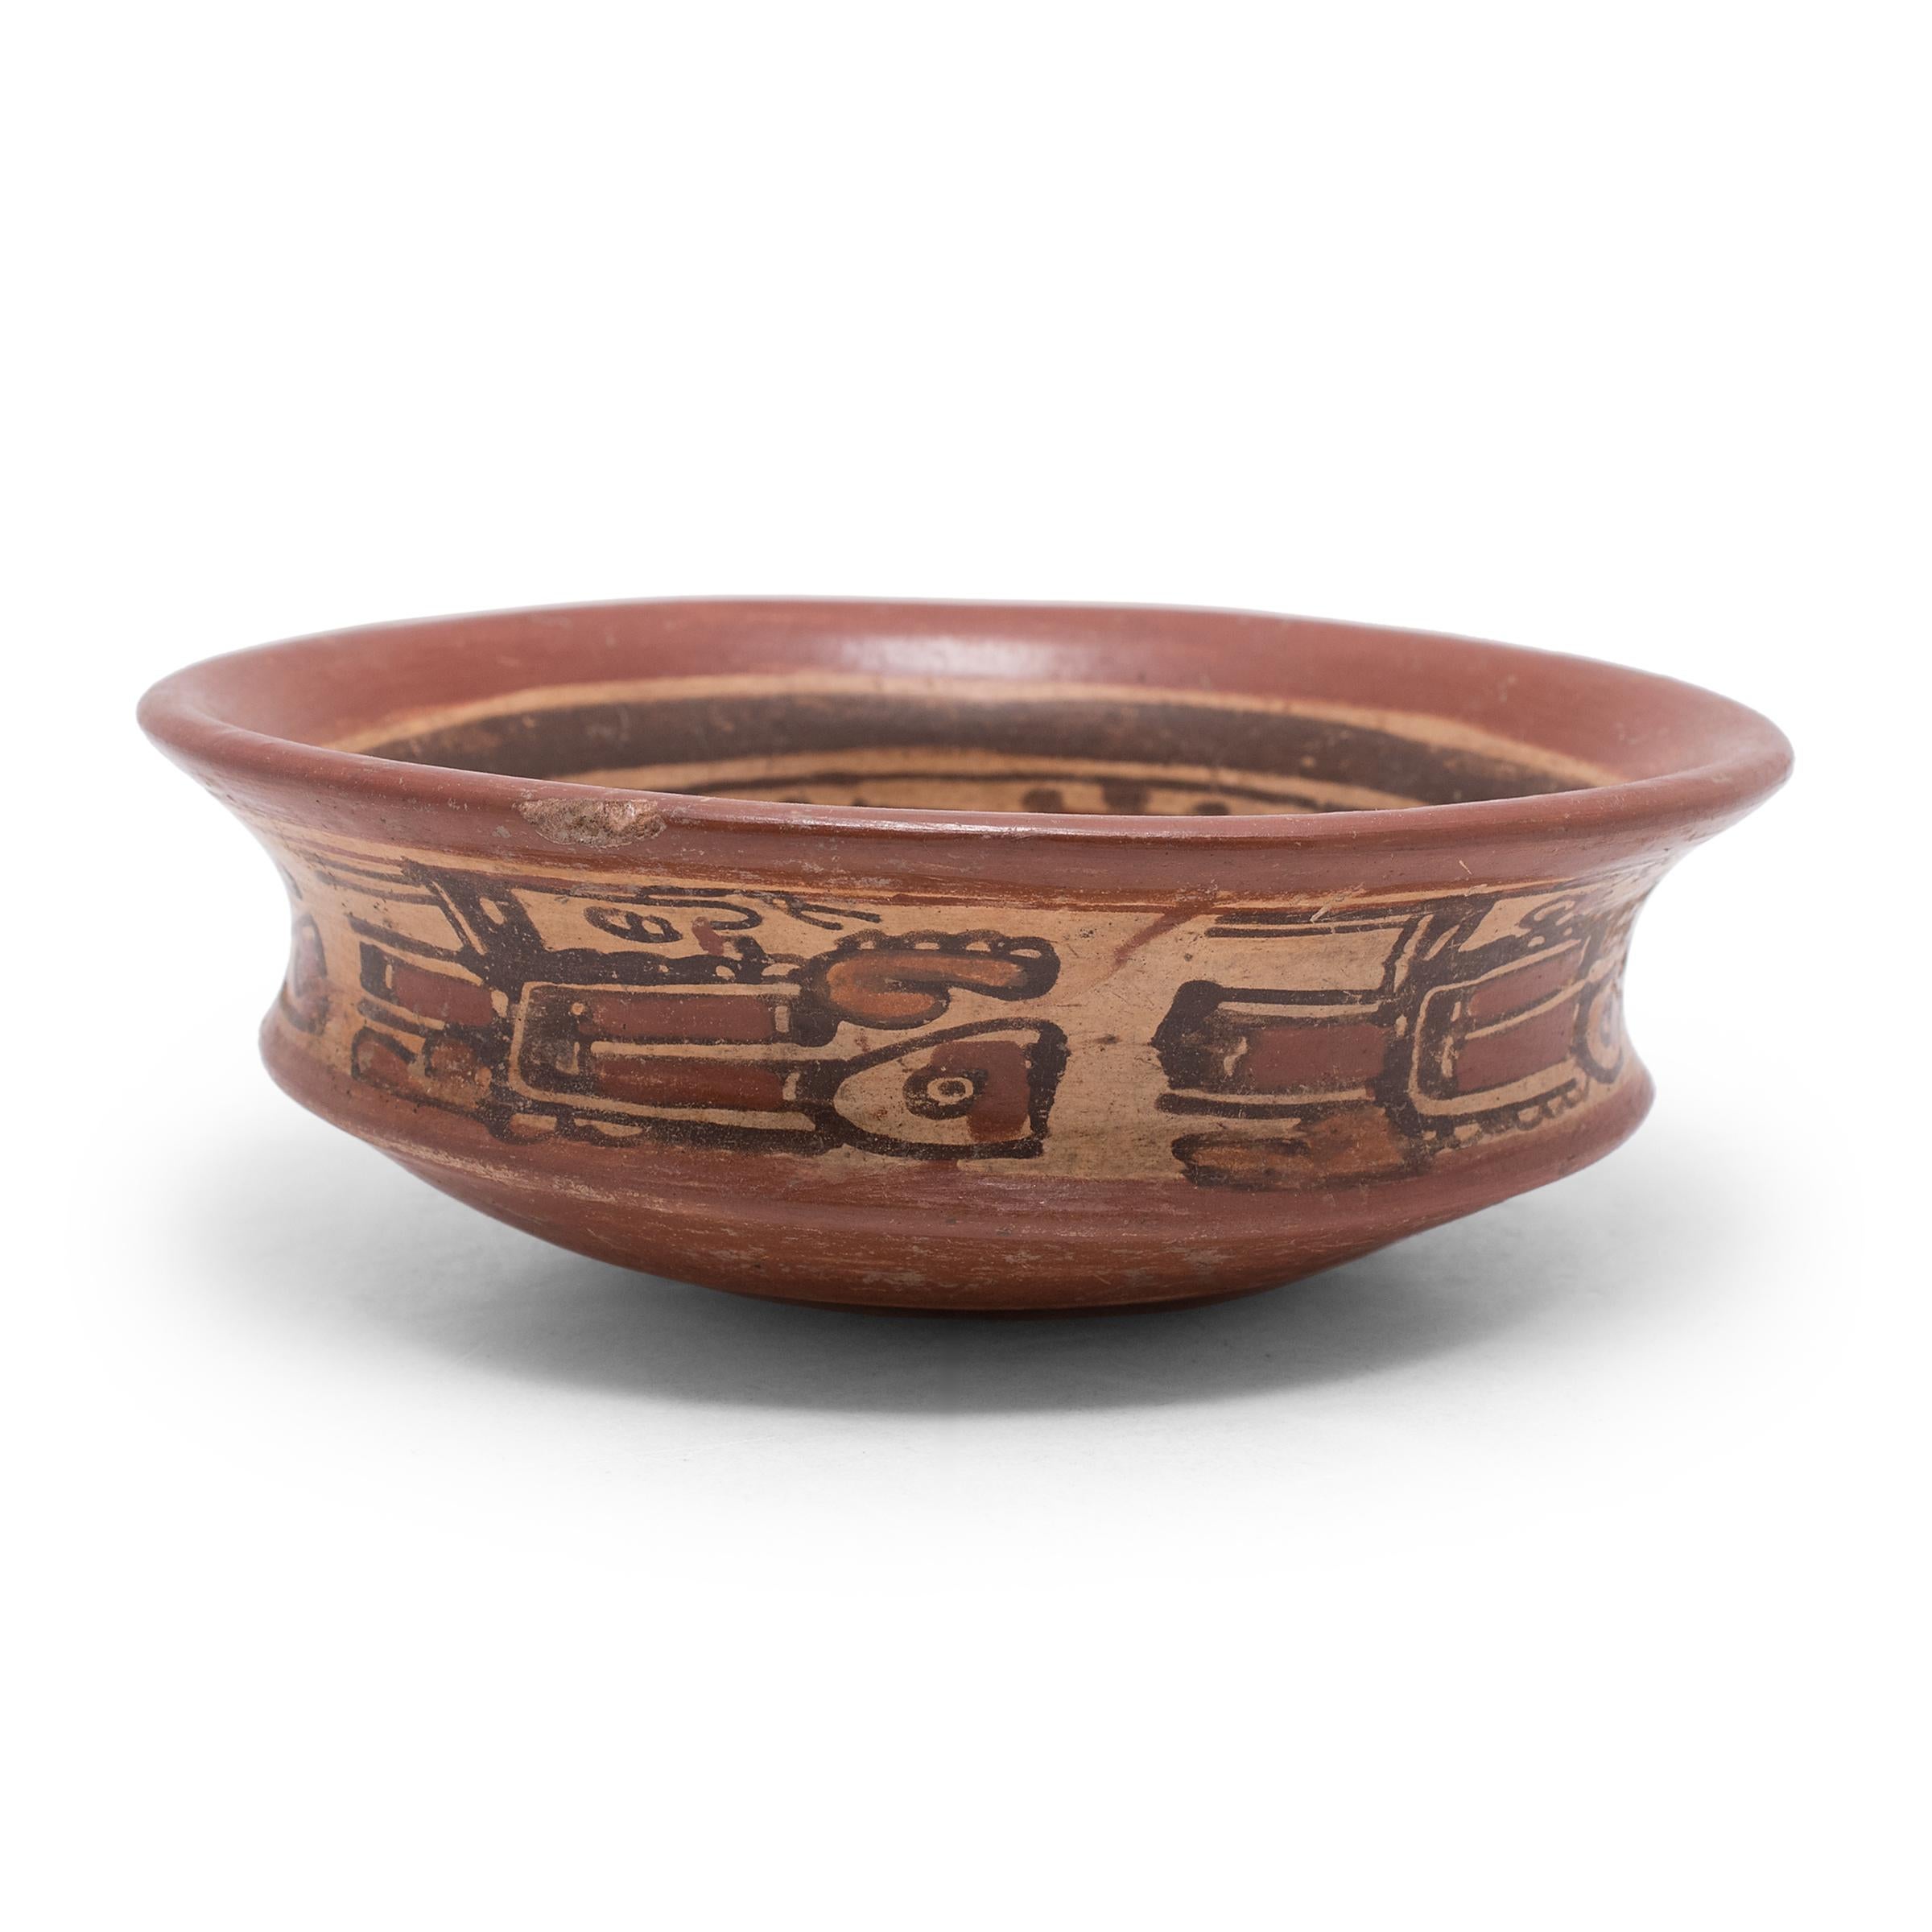 Exhibiting a rich patina, this petite Maya ceramic bowl dating back to c. 600-900 AD was crafted in the El Copador style. The El Copador style is a polychrome ceramic style often made in a cylindrical shape characterized by black and red